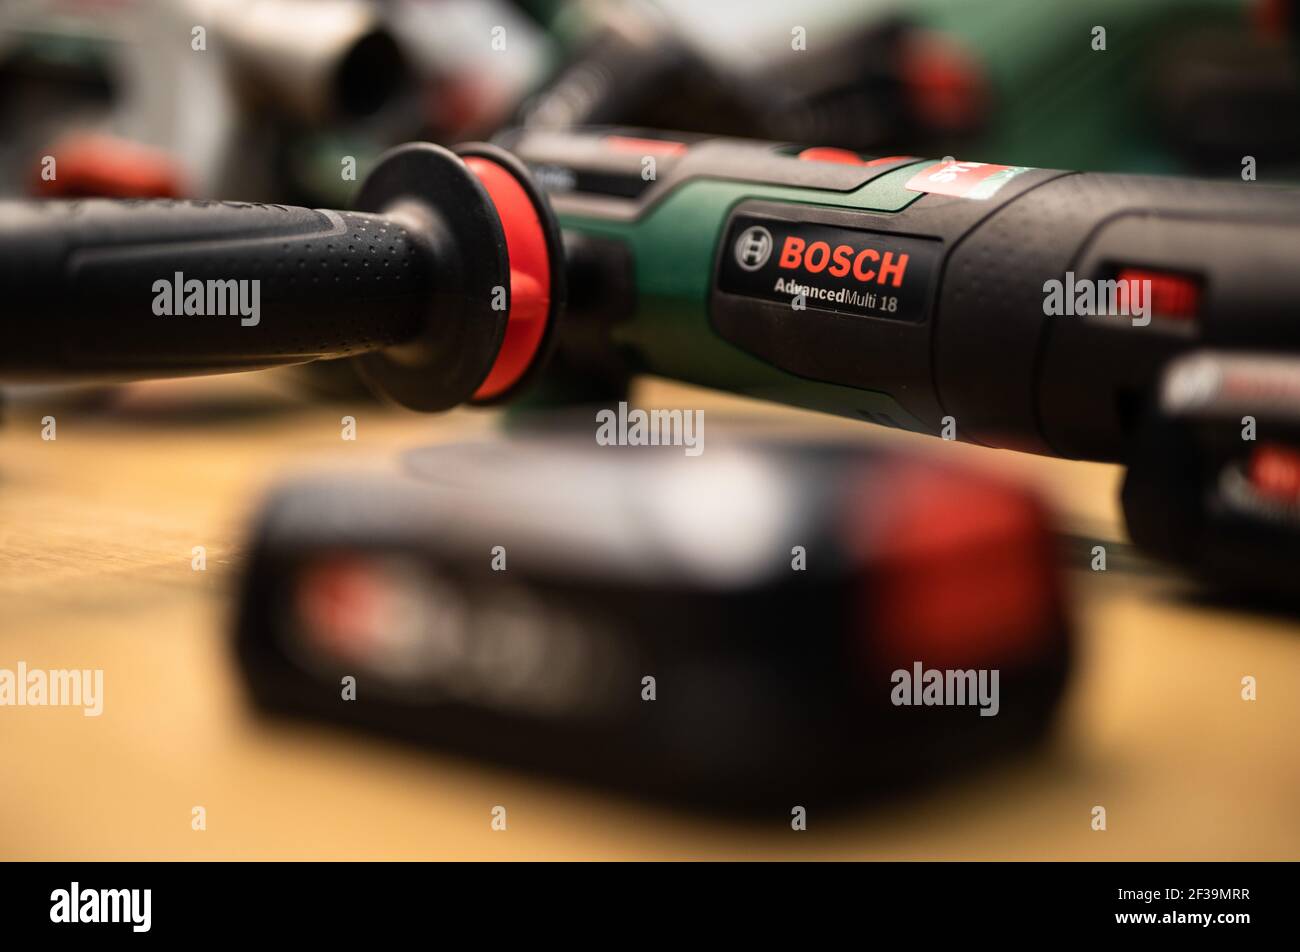 Page 3 - Bosch Germany High Resolution Stock Photography and Images - Alamy